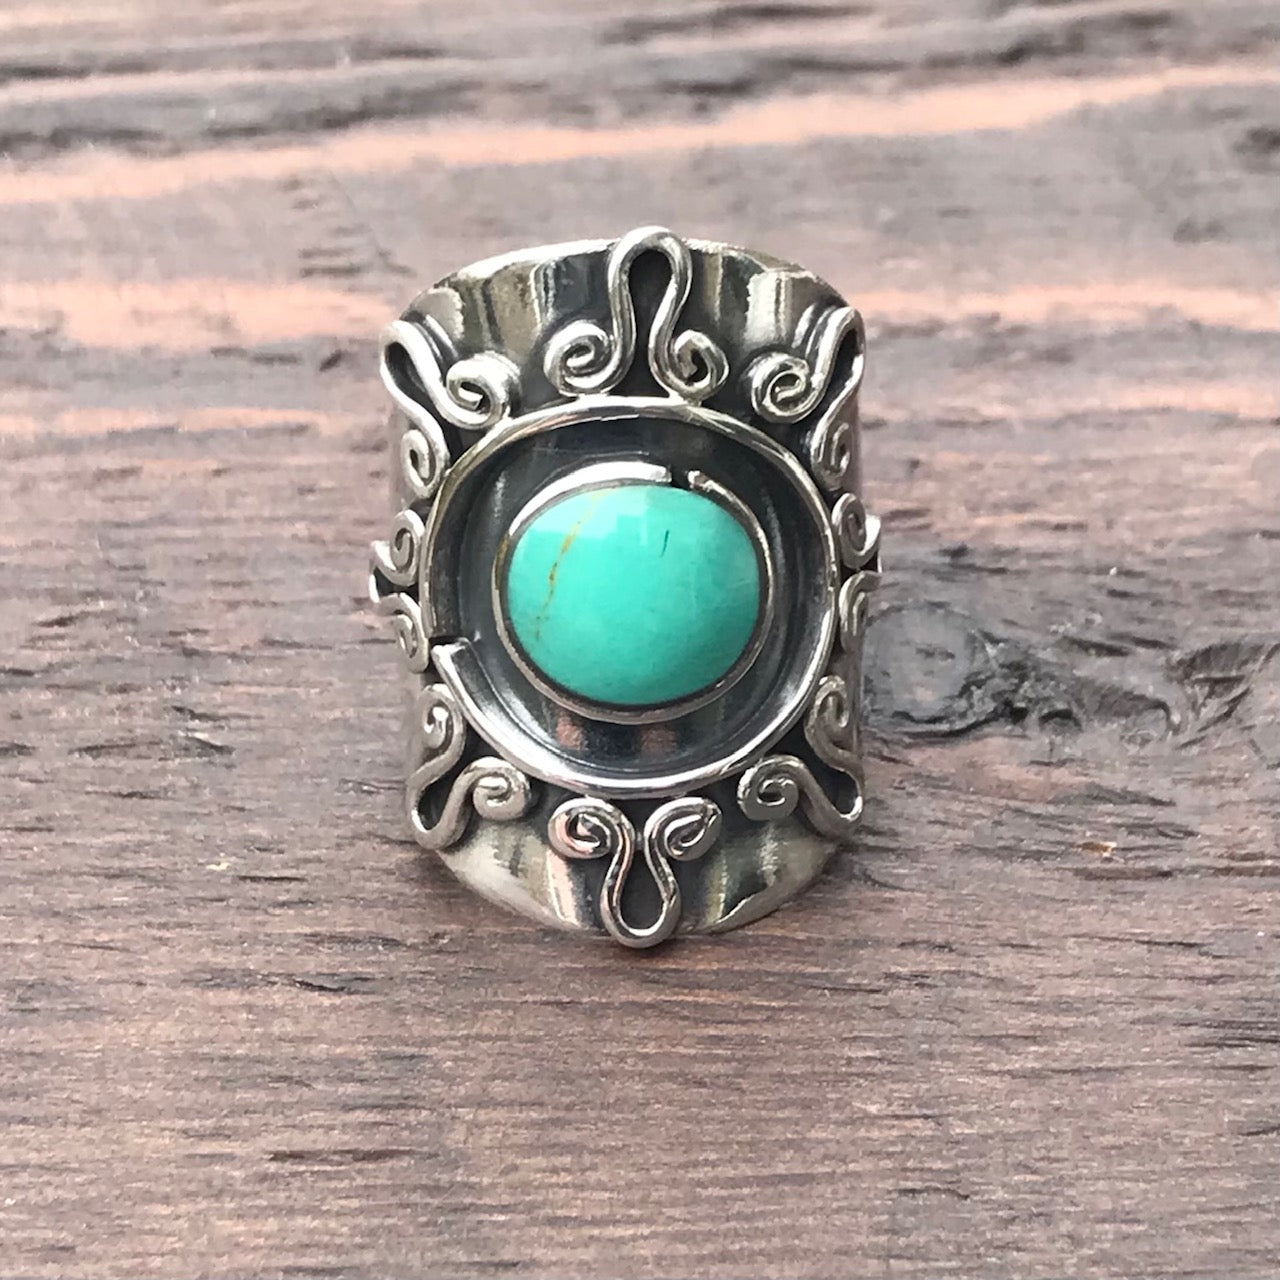 Tribal Swirl Sterling Silver & Green Turquoise Ring